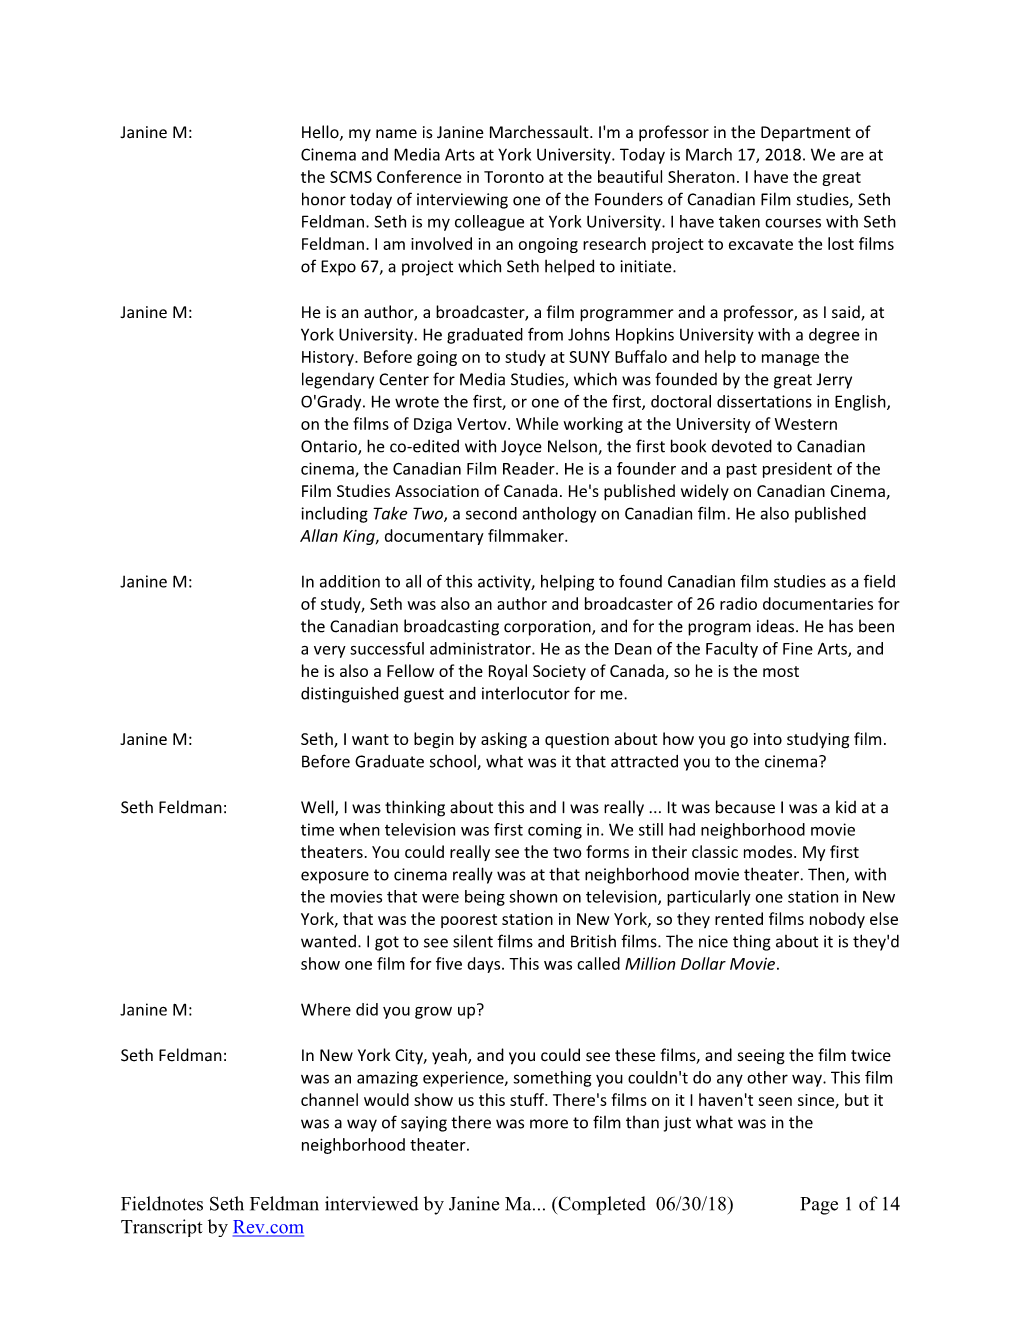 Fieldnotes Seth Feldman Interviewed by Janine Ma... (Completed 06/30/18) Page 1 of 14 Transcript by Rev.Com